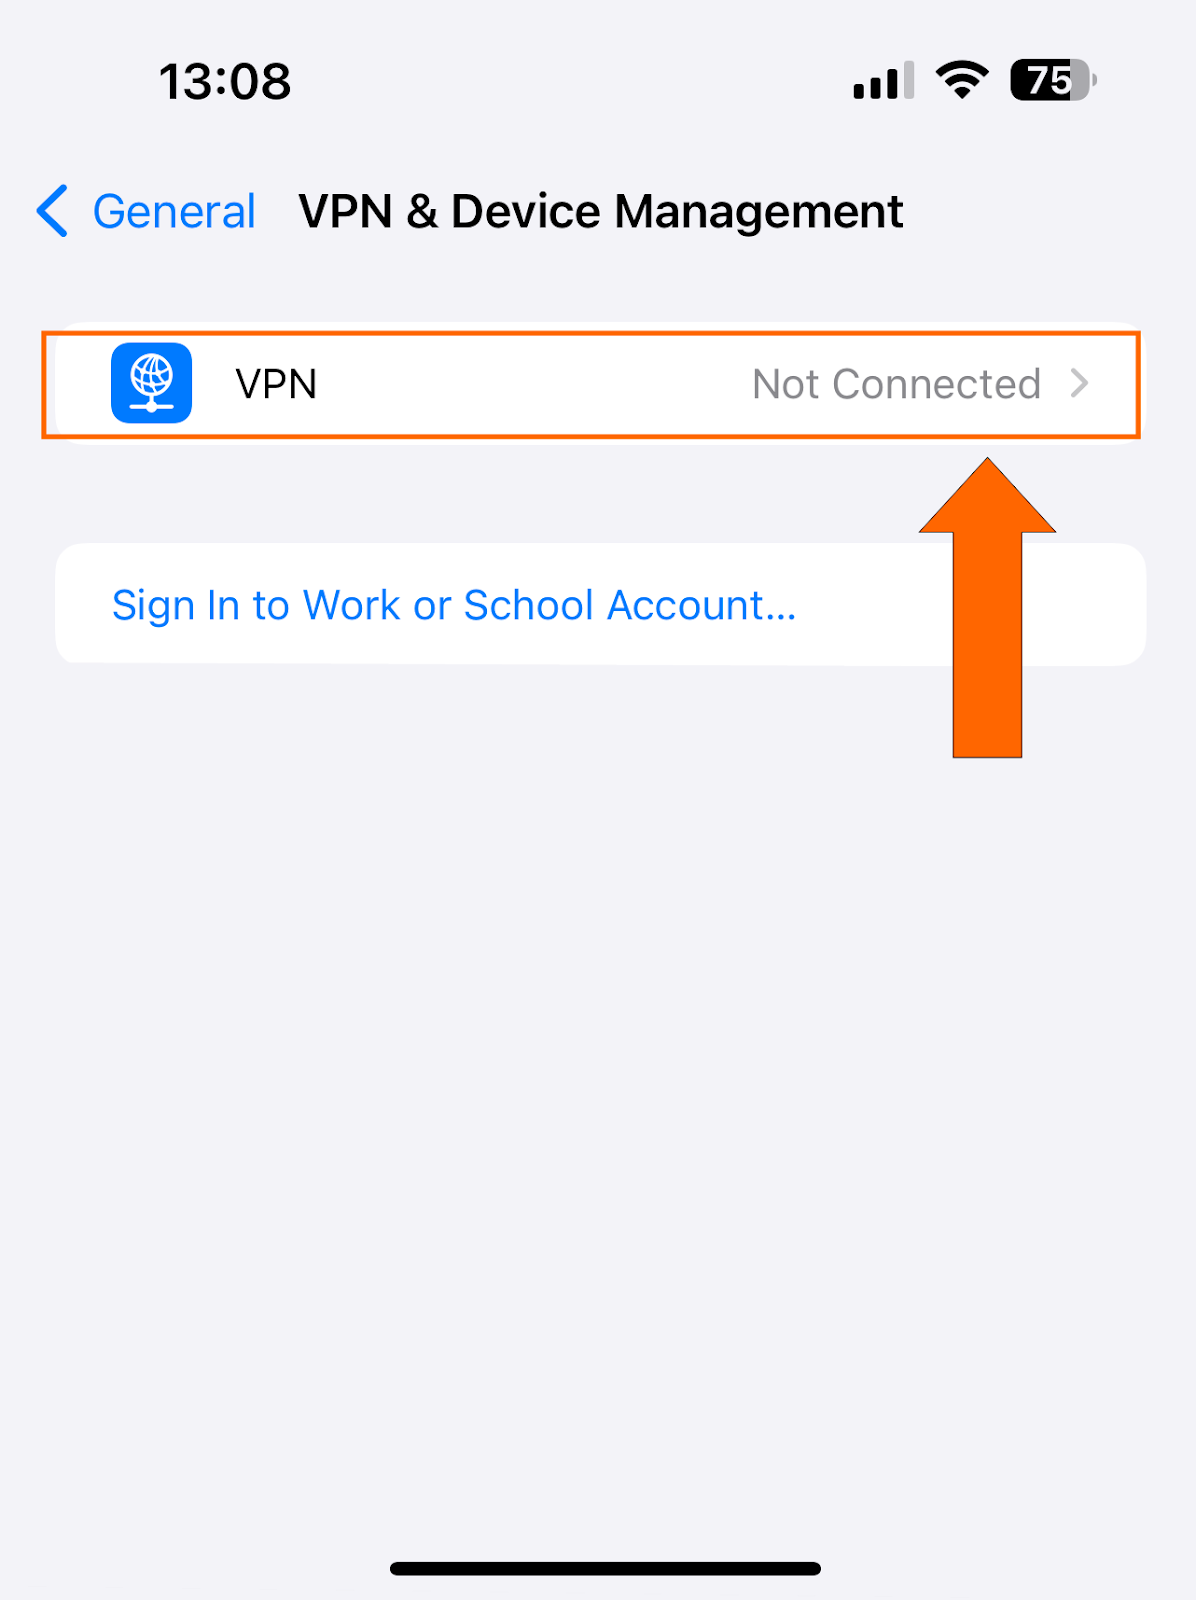 VPN management menu for iOS with VPN highlighted.